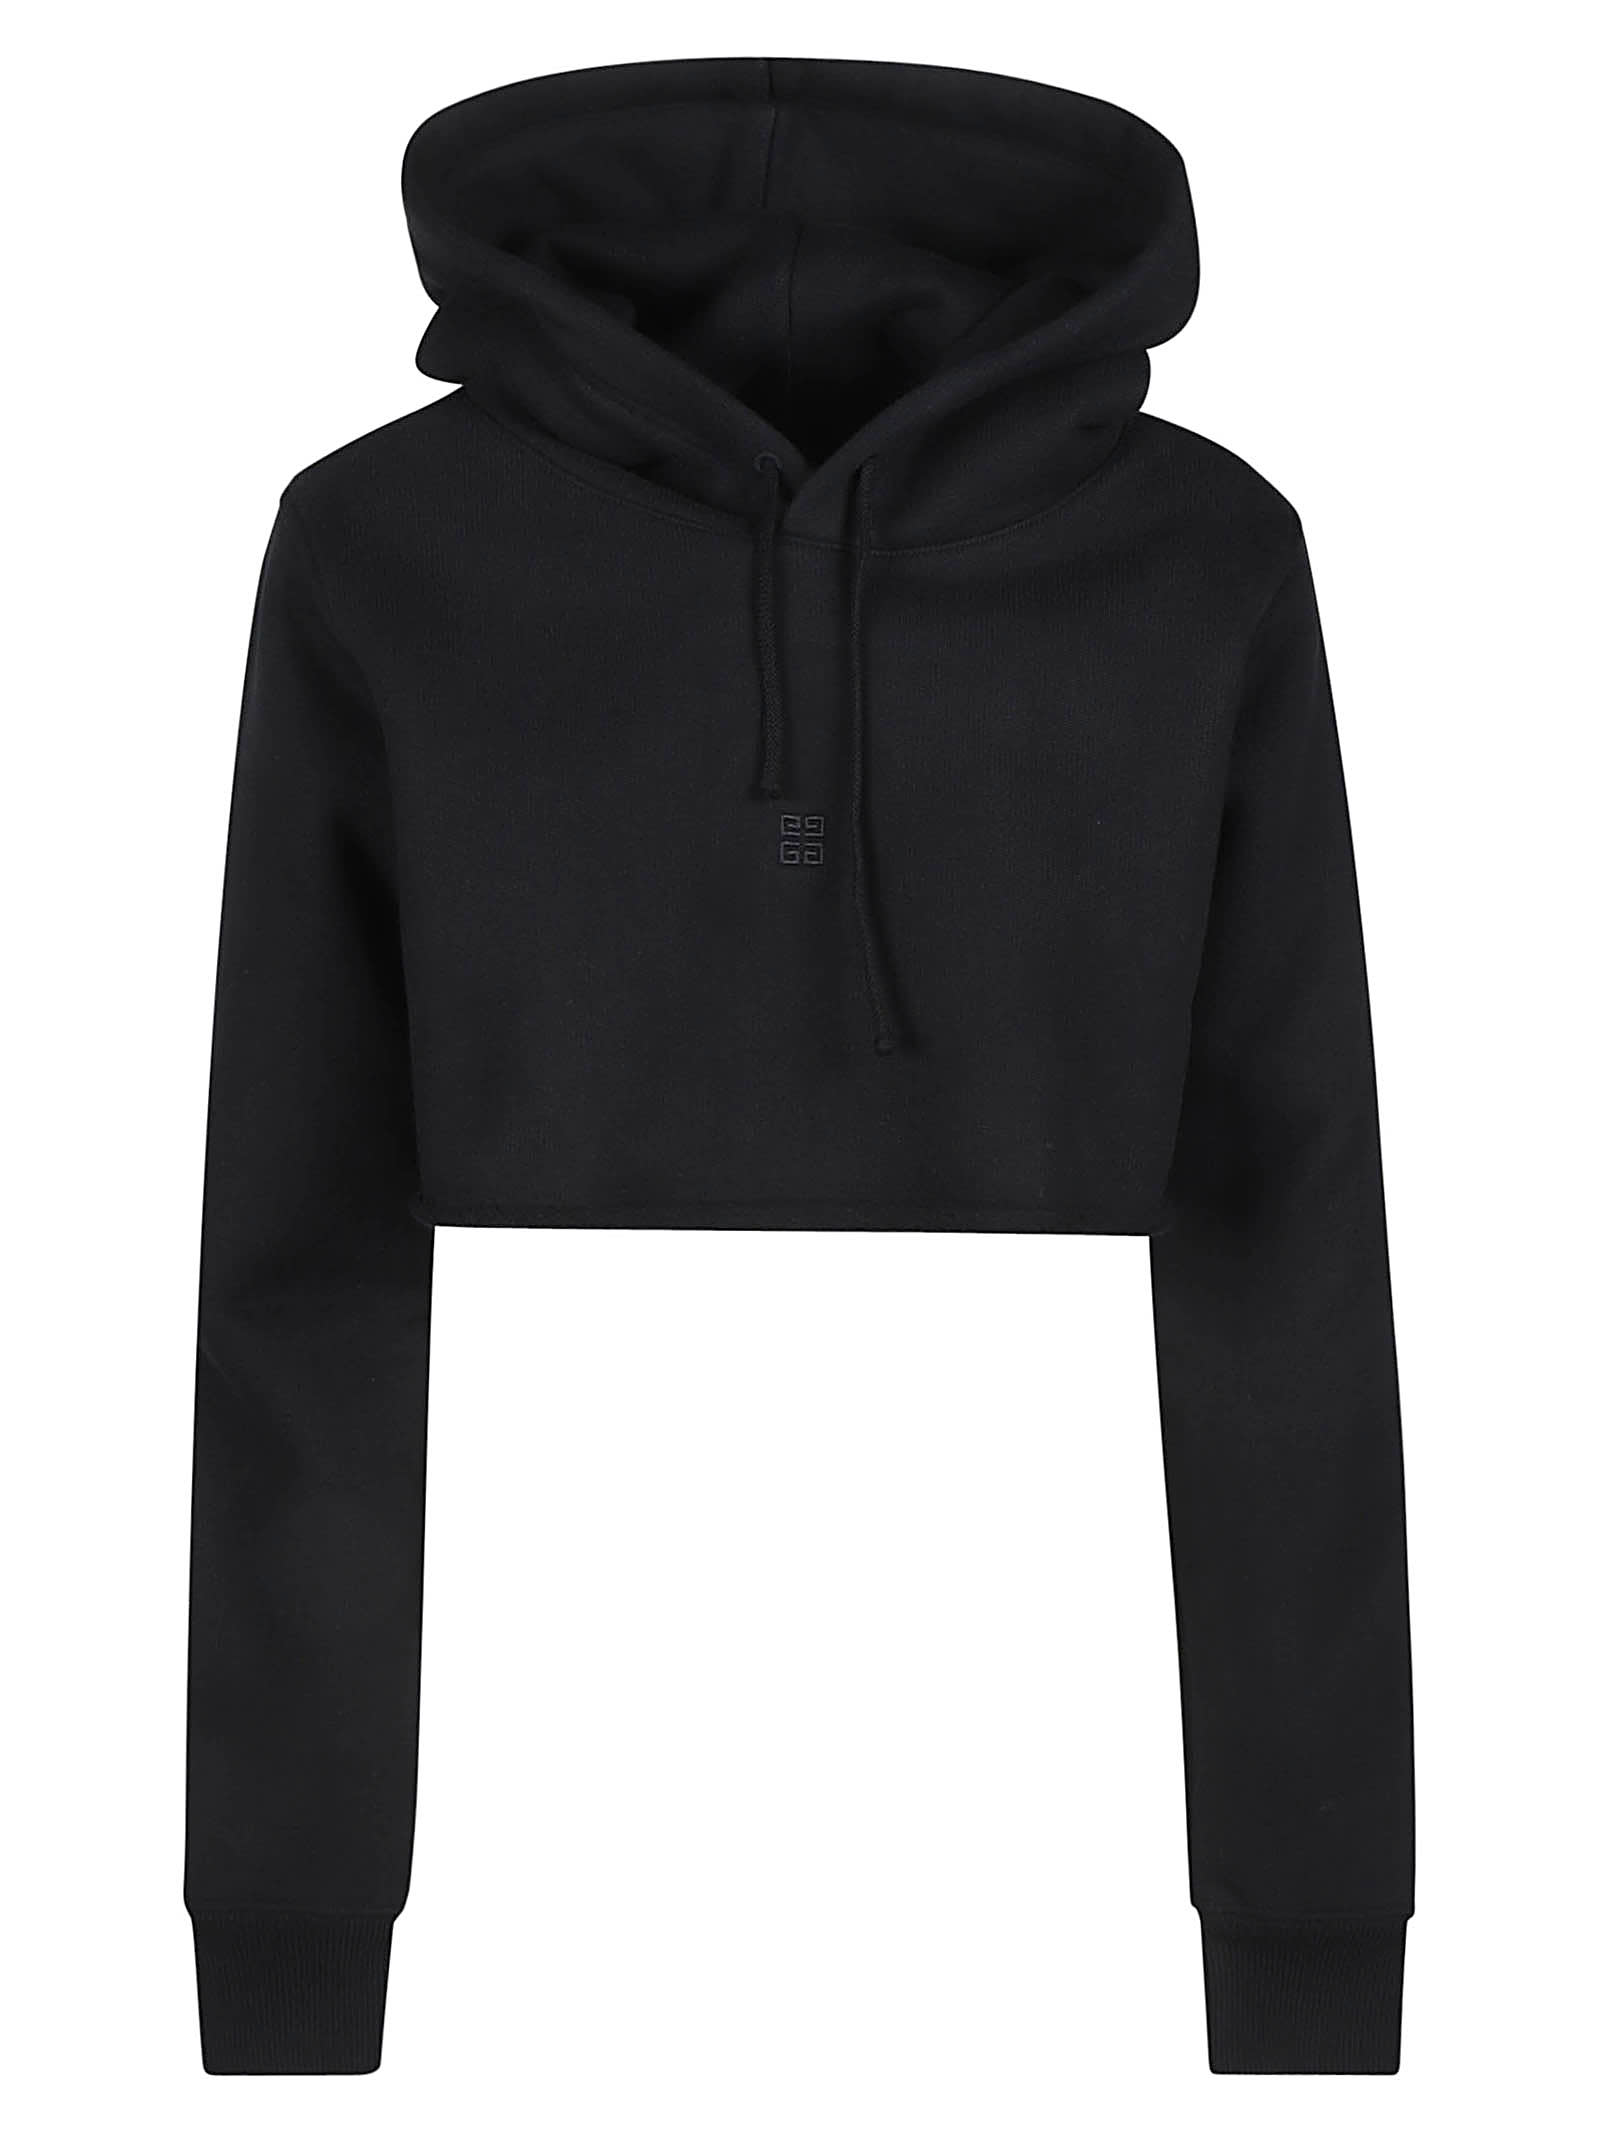 GIVENCHY CROPPED HOODIE